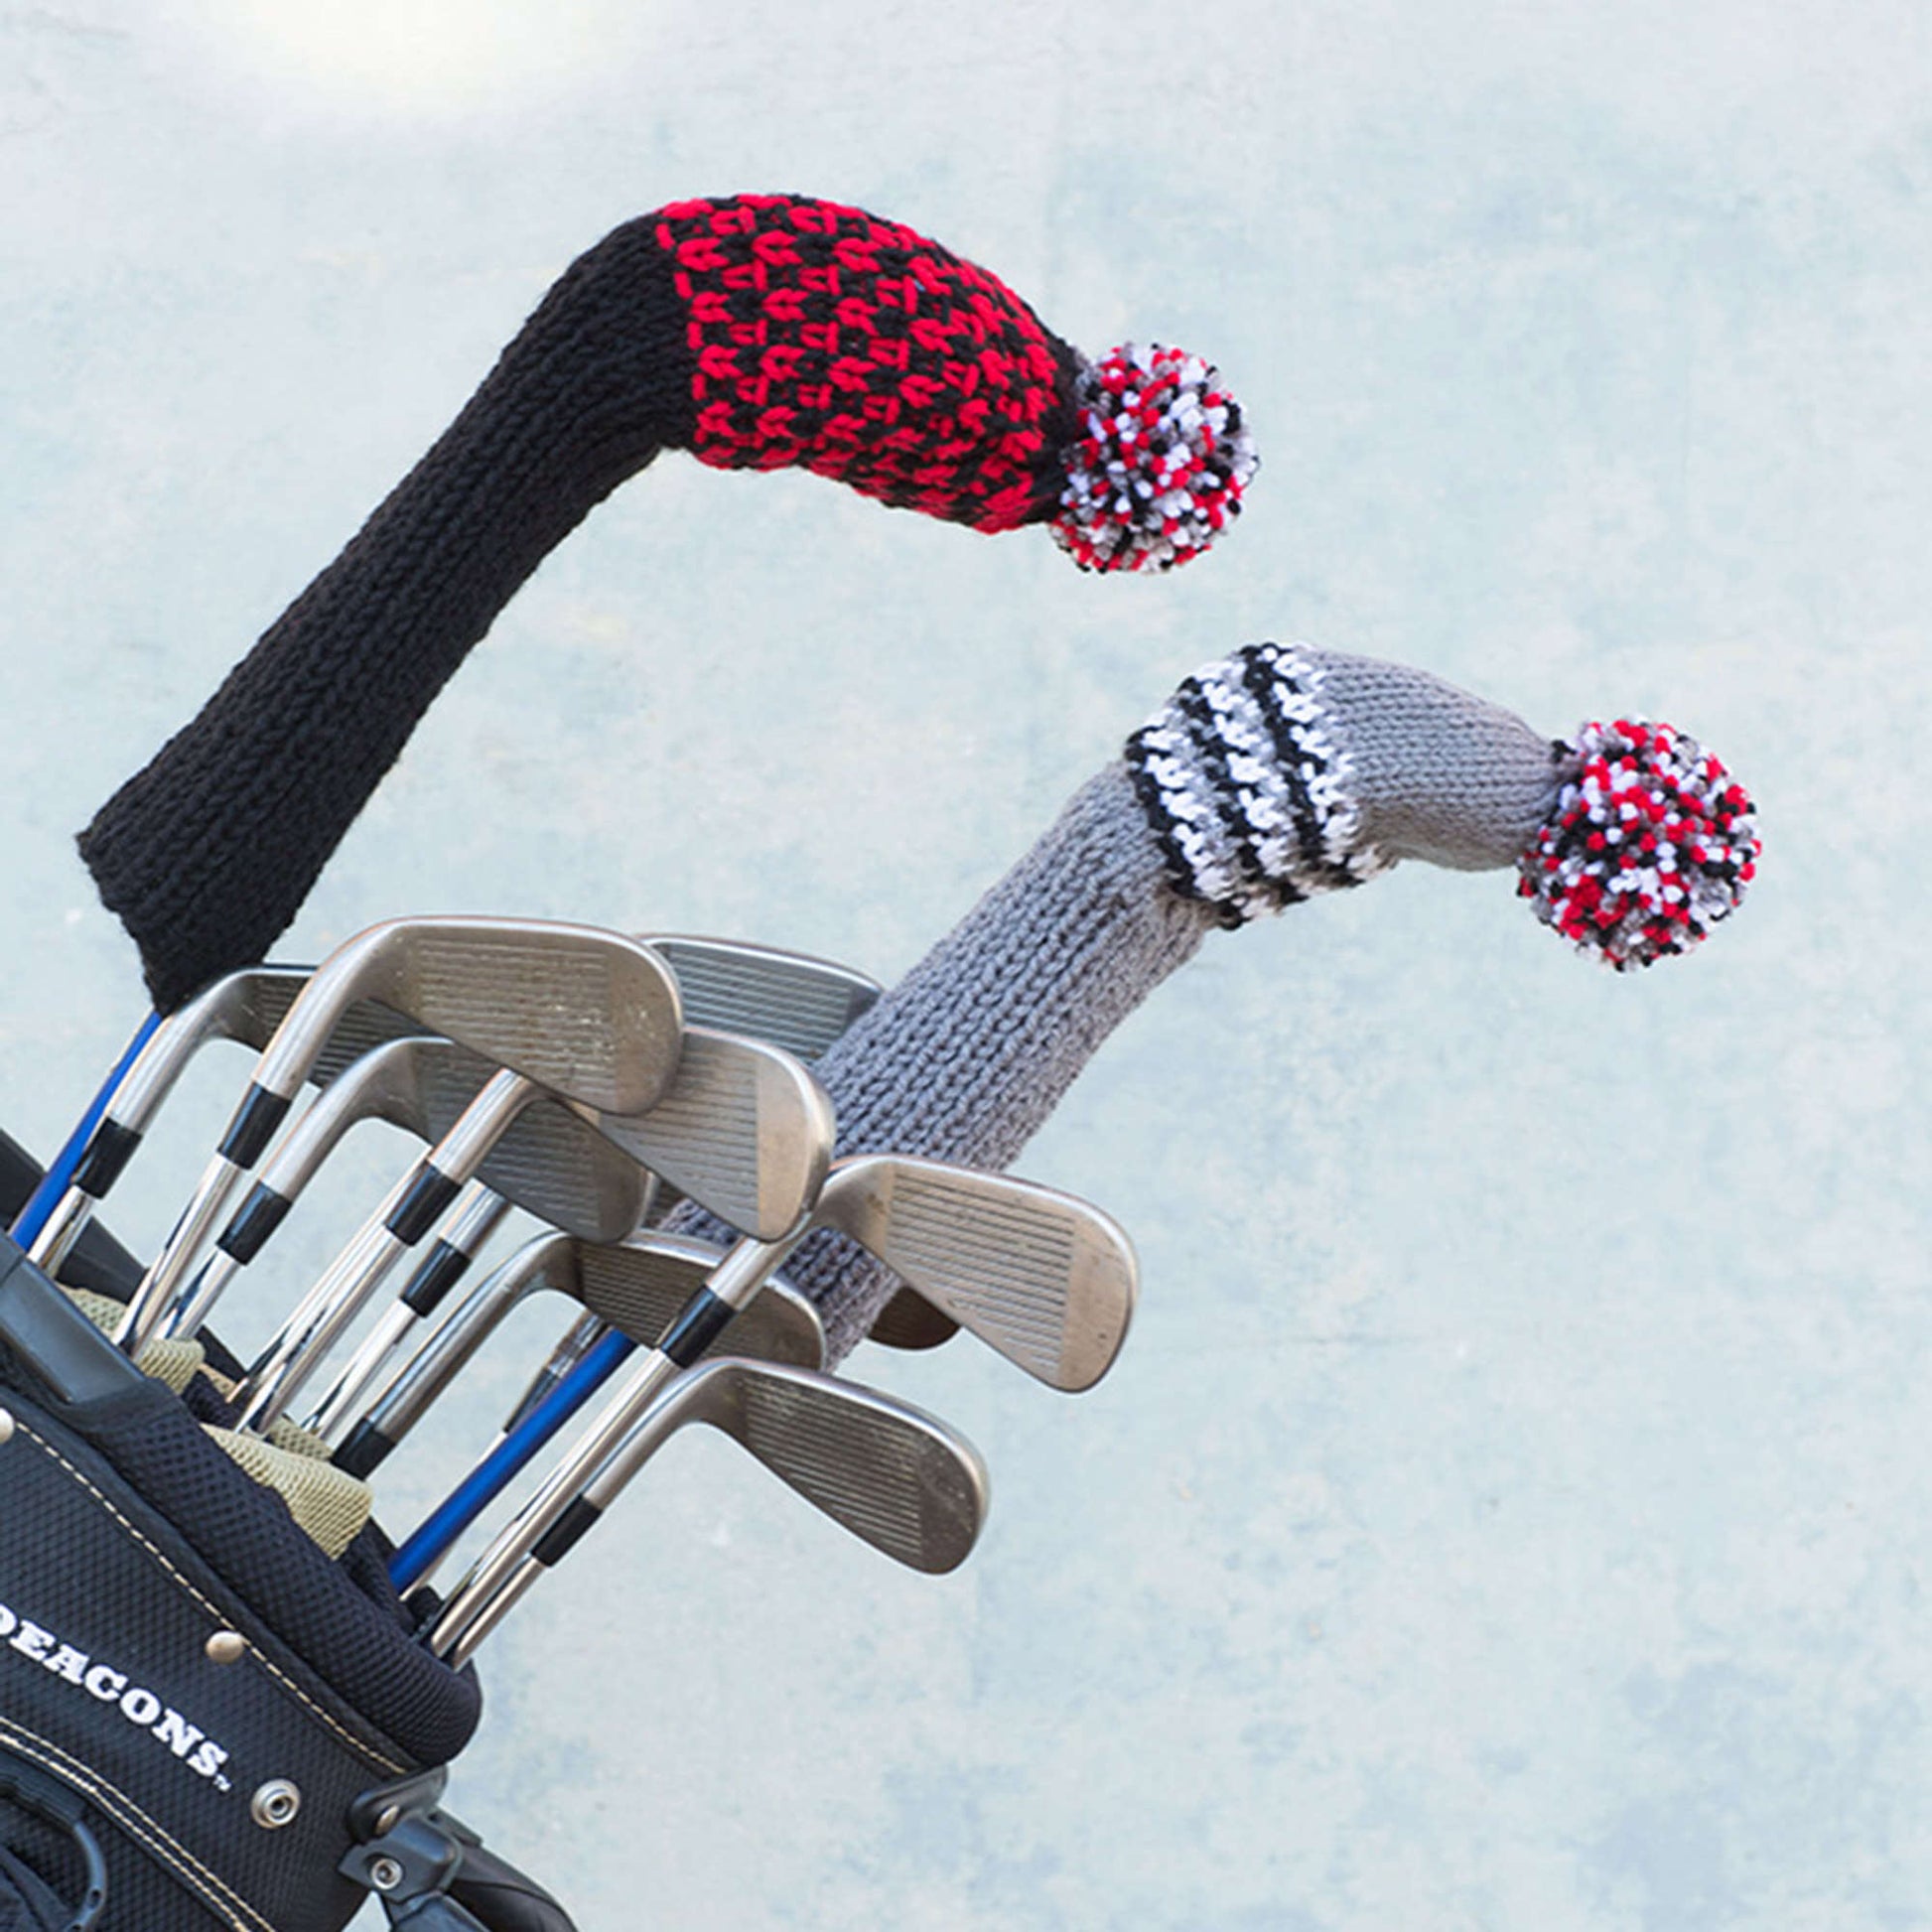 Red Heart Knit Golf Headcovers Red Heart Knit Golf Headcovers